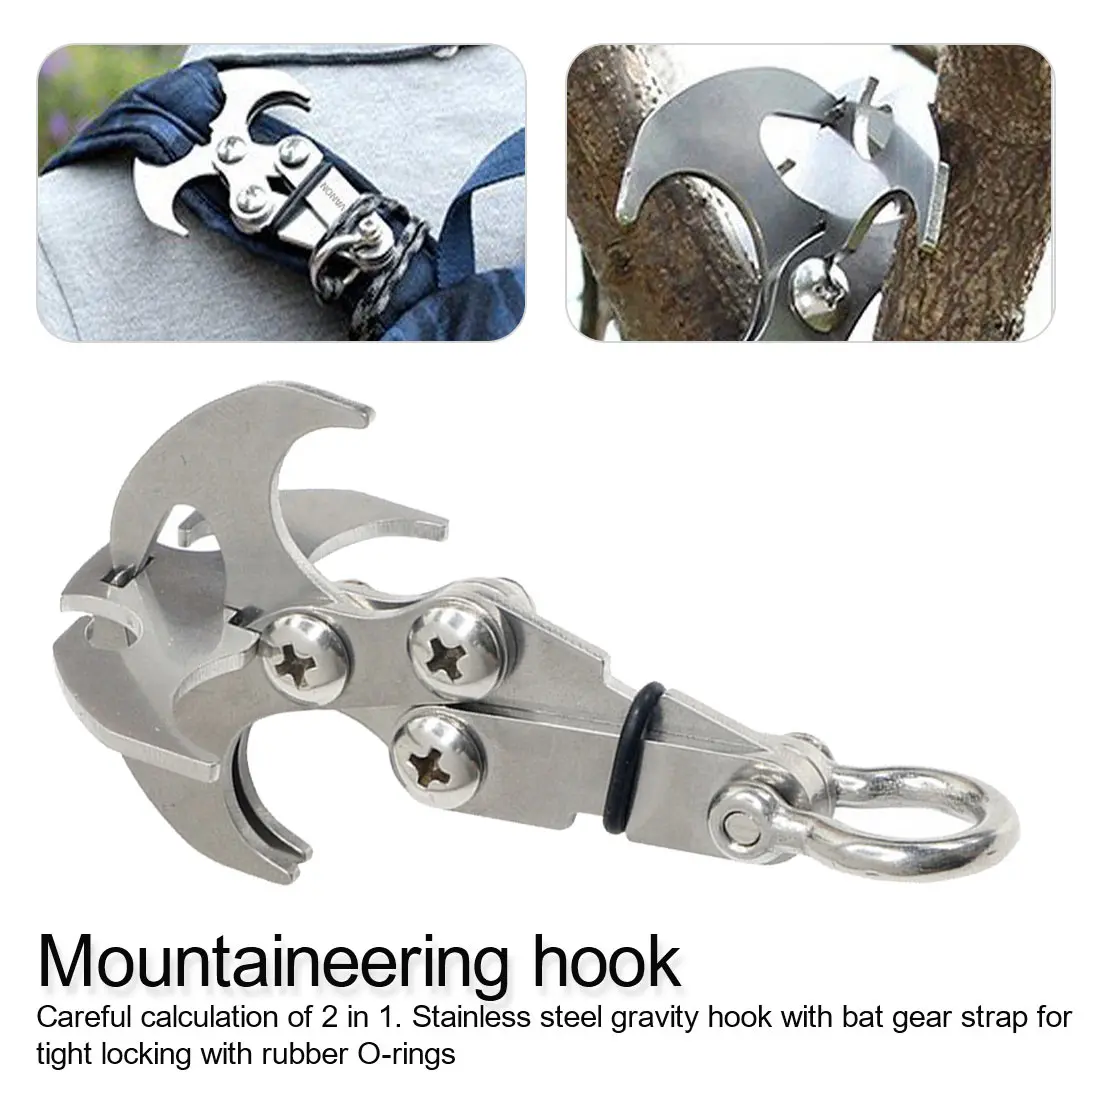 Multi-functional Stainless Steel Gravity Survival Grappling Claw